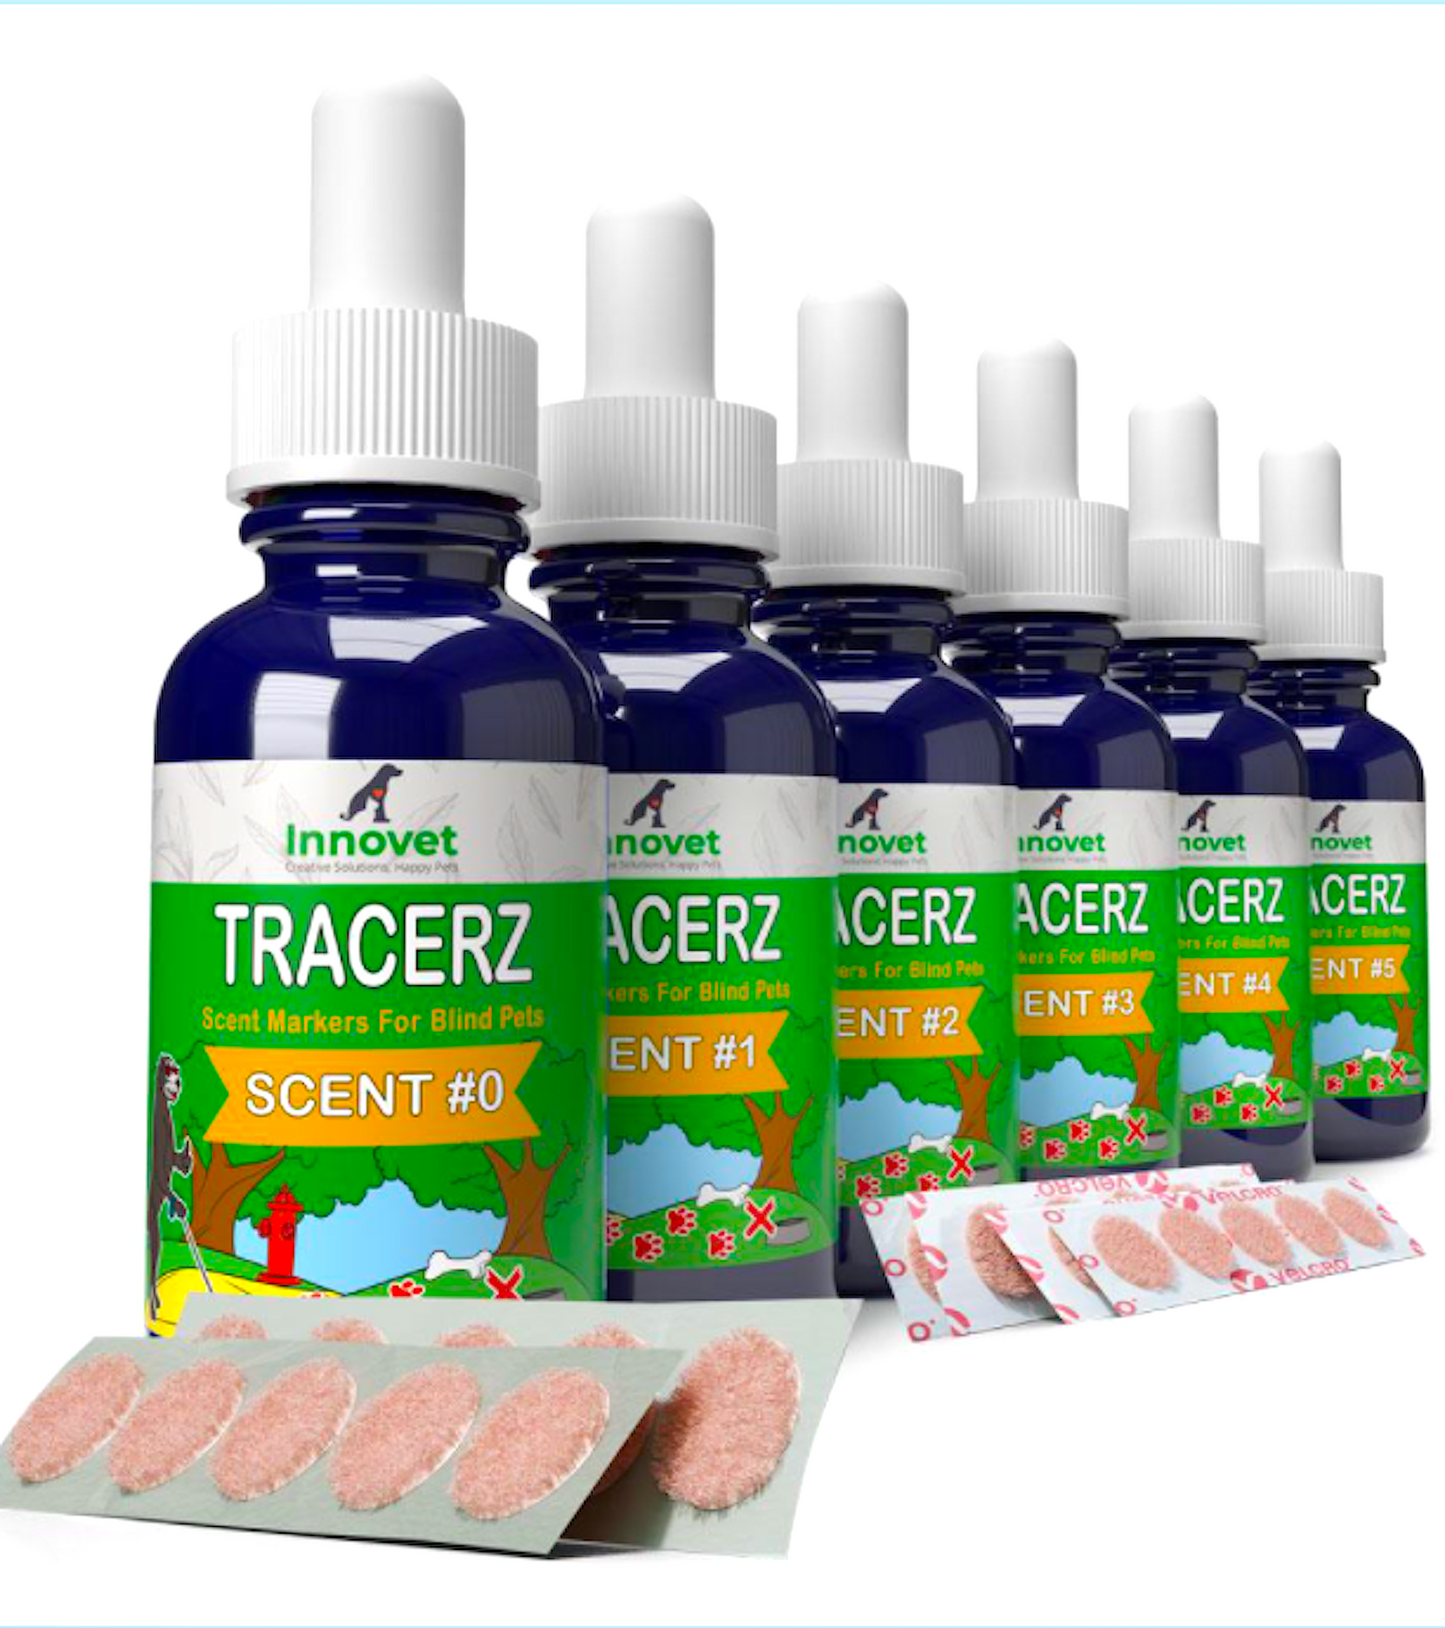 TRACERZ SCENT MARKERS: train your blind dog to "see" with their nose